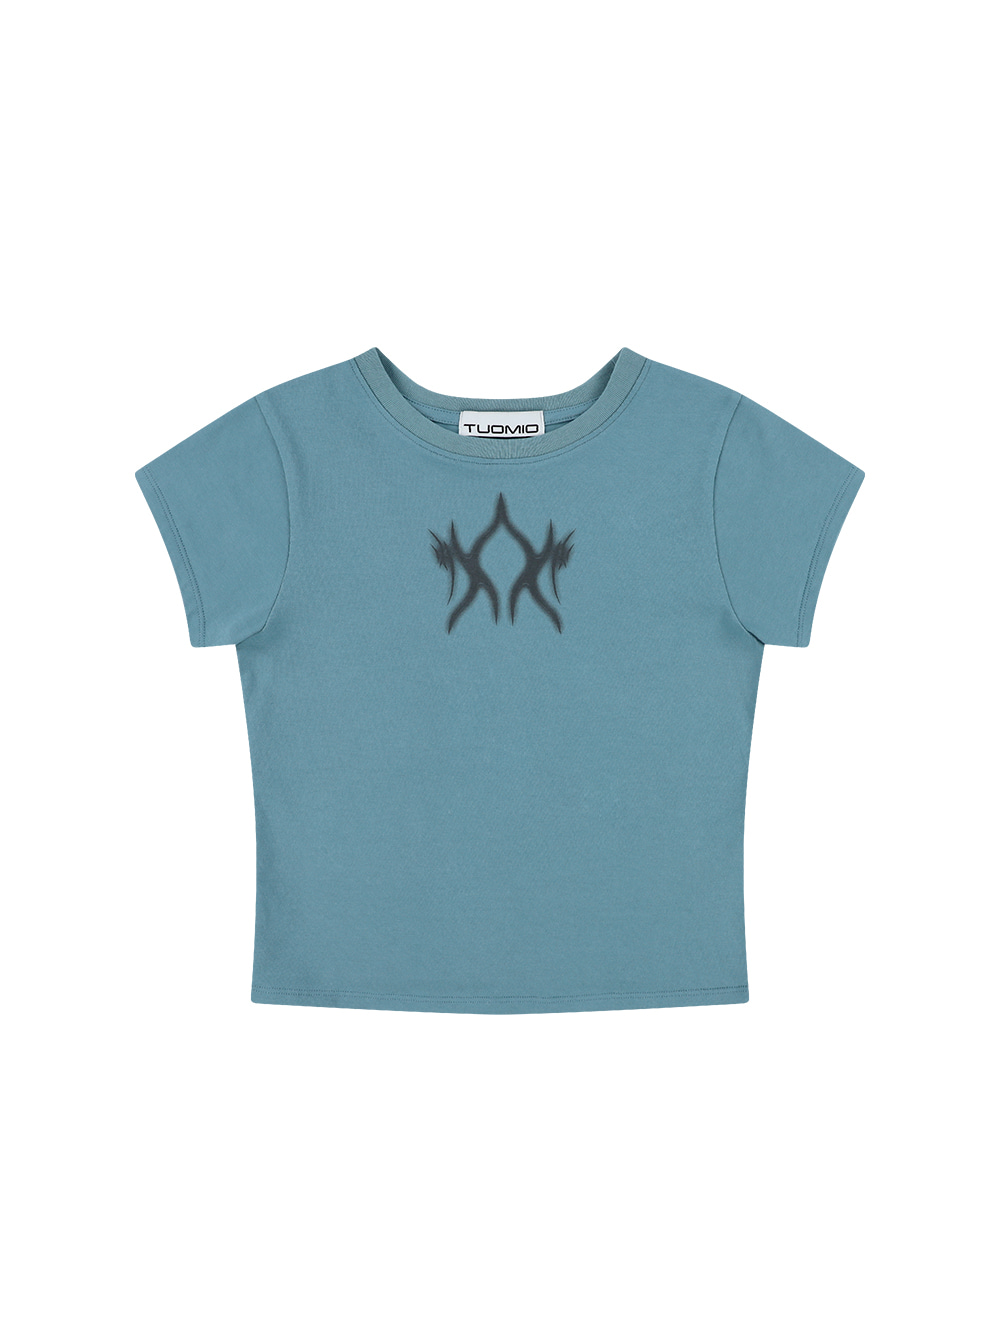 FLAME BABY T-SHIRTS [DUSTY BLUE]